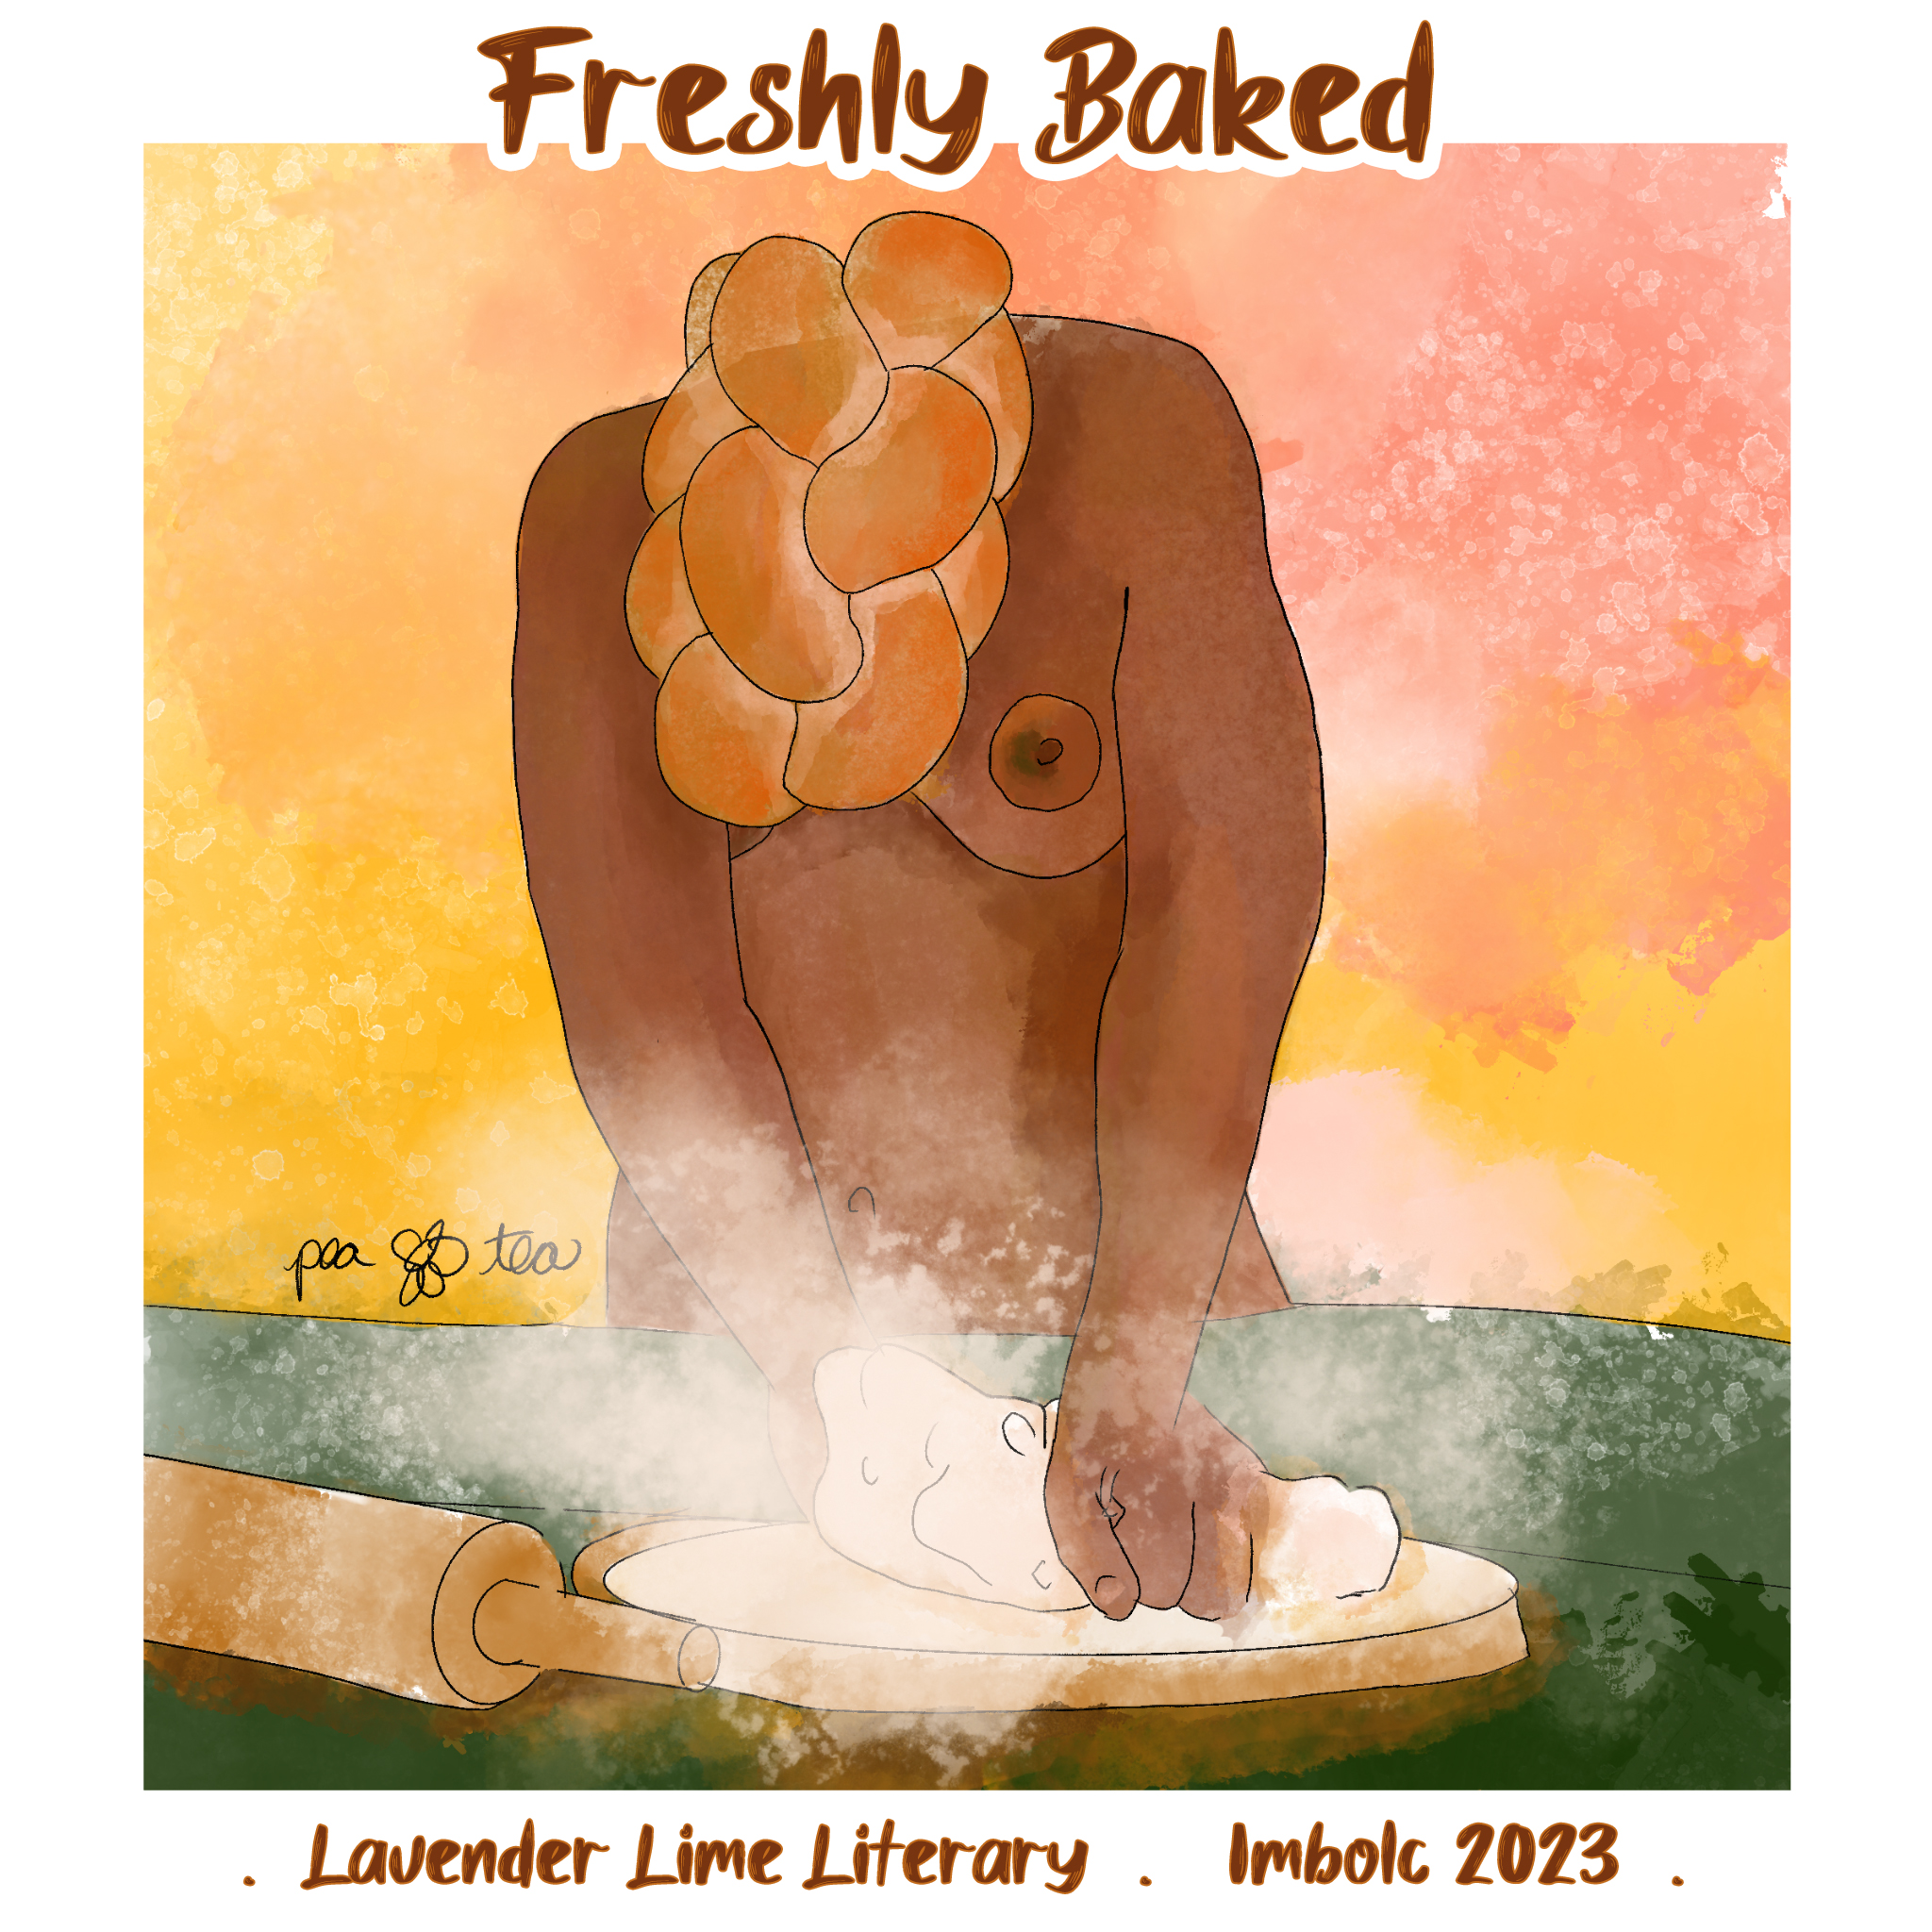 Watercolor painting of a black woman in the nude. Her head is a braided loaf of bread, and she's kneading dough at a green table with a rolling pin and a cloud of flour around her hands.